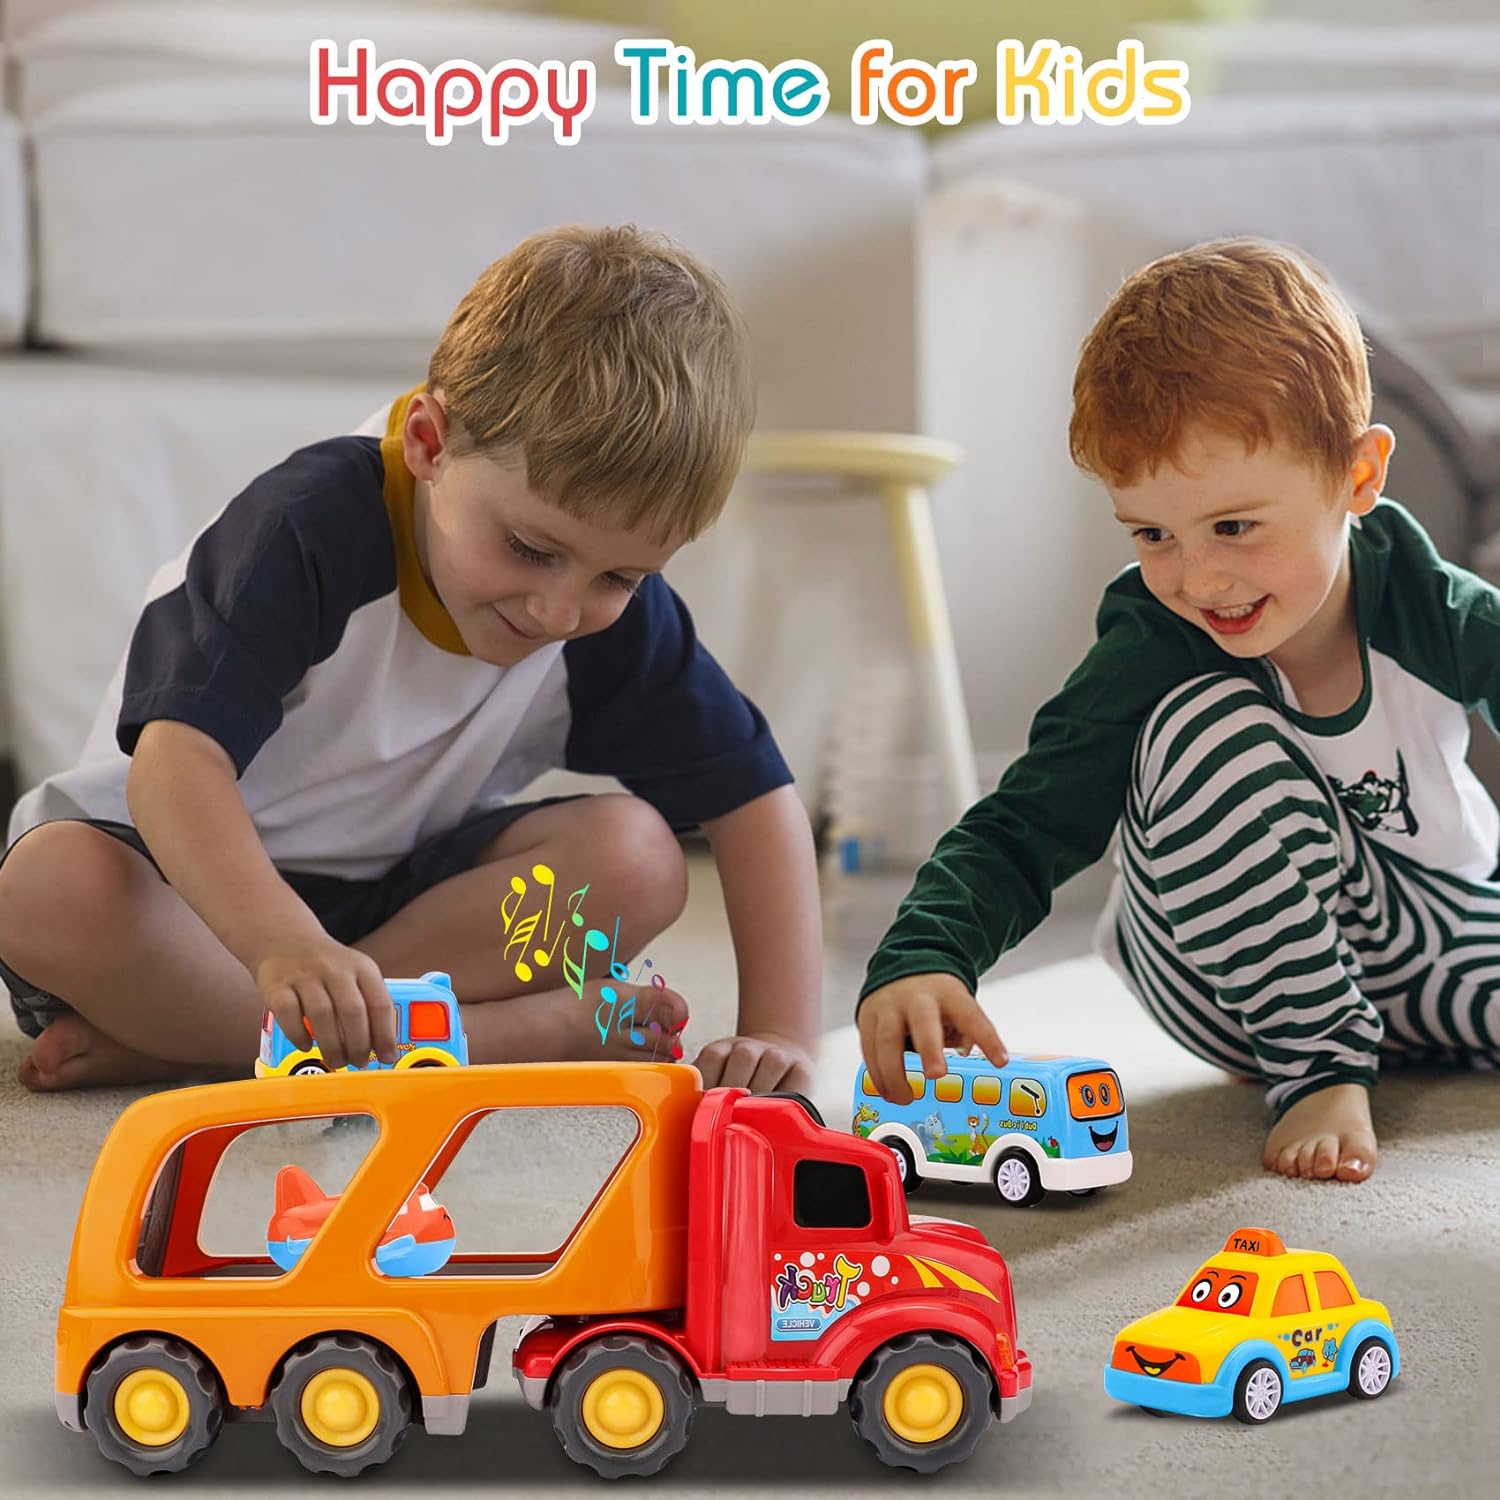 Nicmore Toddler Toys Car for Boys: Kids Toys for 2 3 4 Year Old Boys Girls | Carrier Toy Trucks | Toddler Toys Age 2-3 2-4 Baby Toys 18-24 Months Birthday Kids Gift